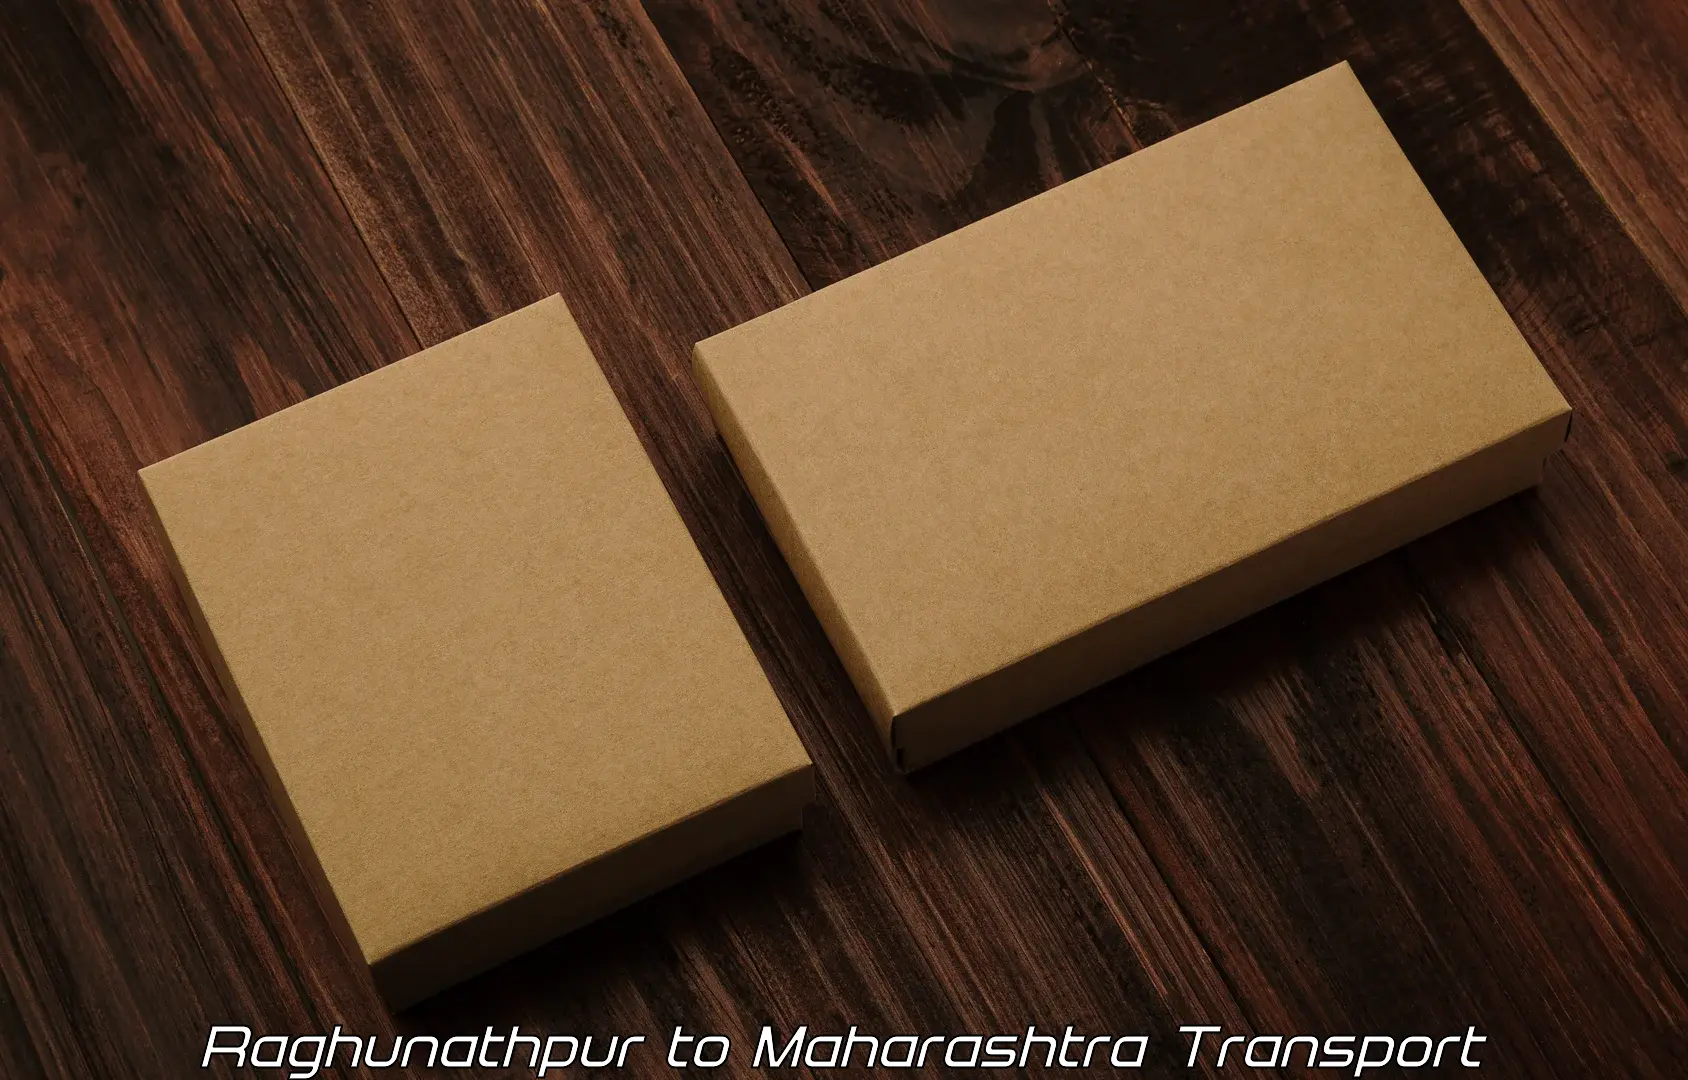 Nationwide transport services Raghunathpur to Dharmabad